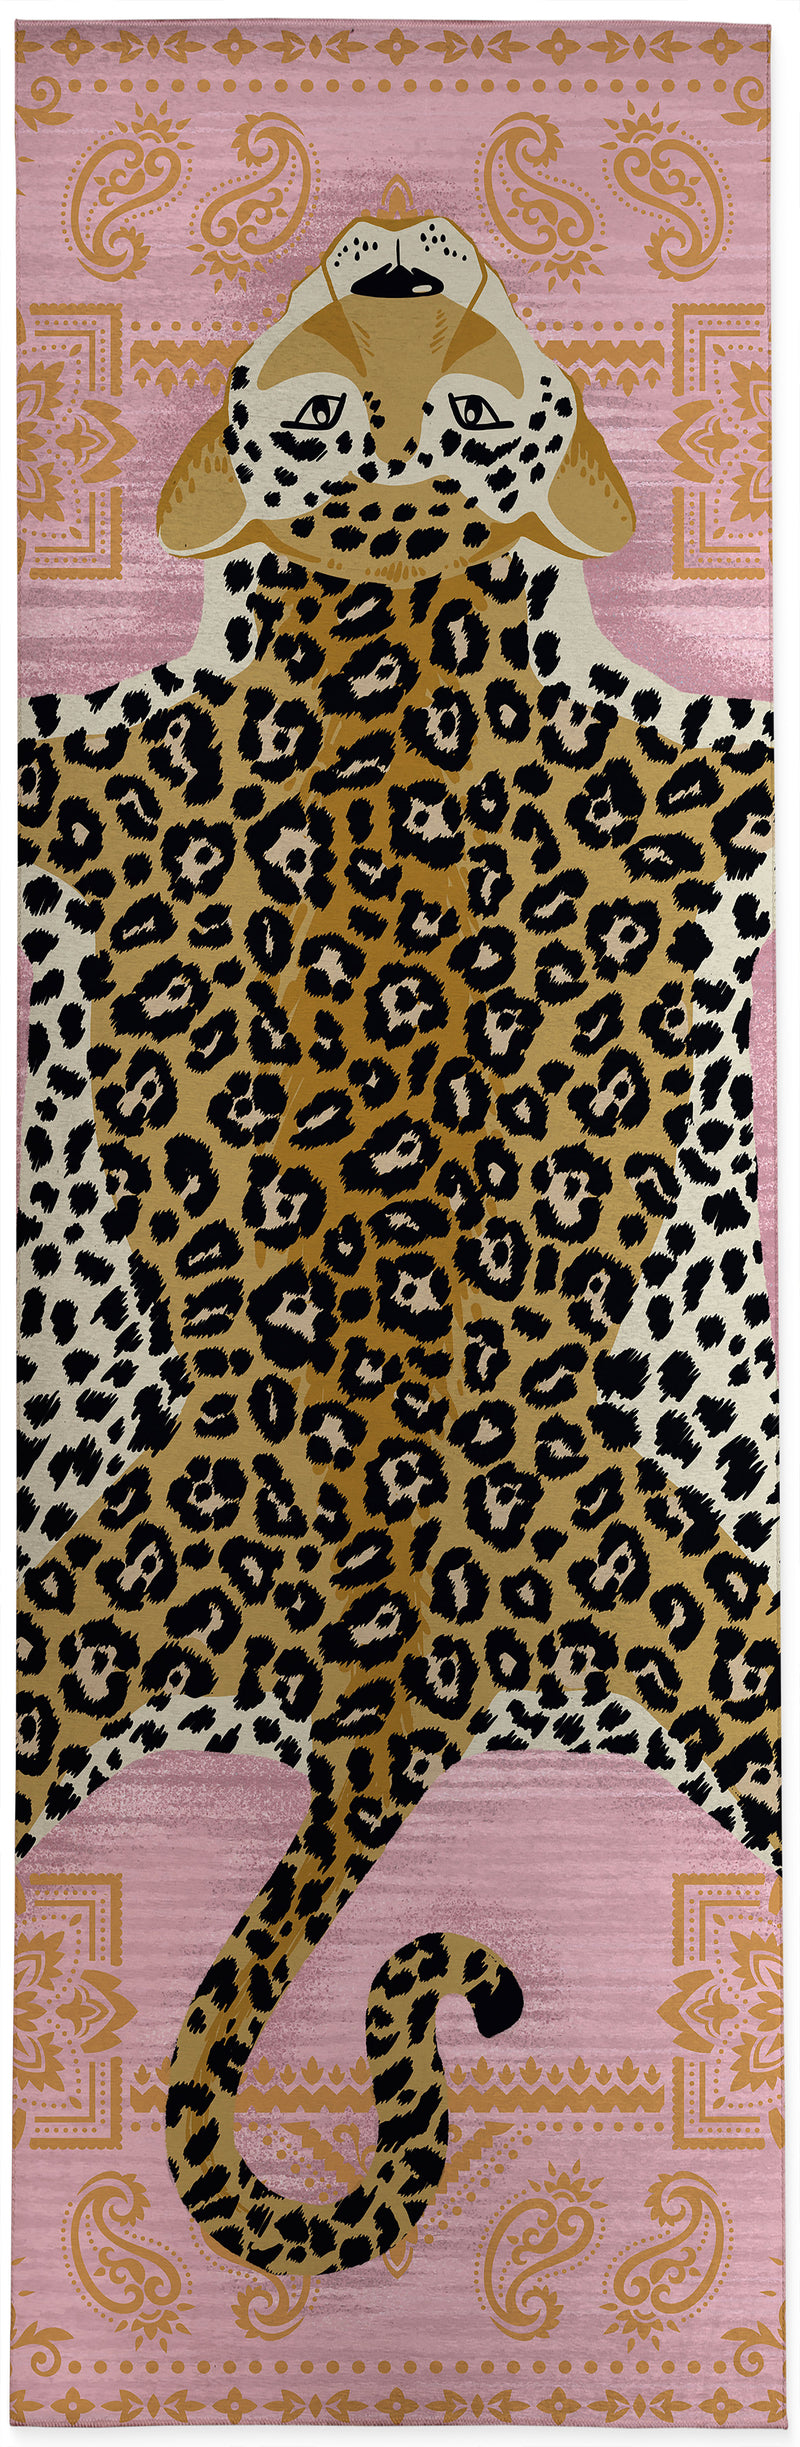 LEOPARD PINK Area Rug By Kavka Designs